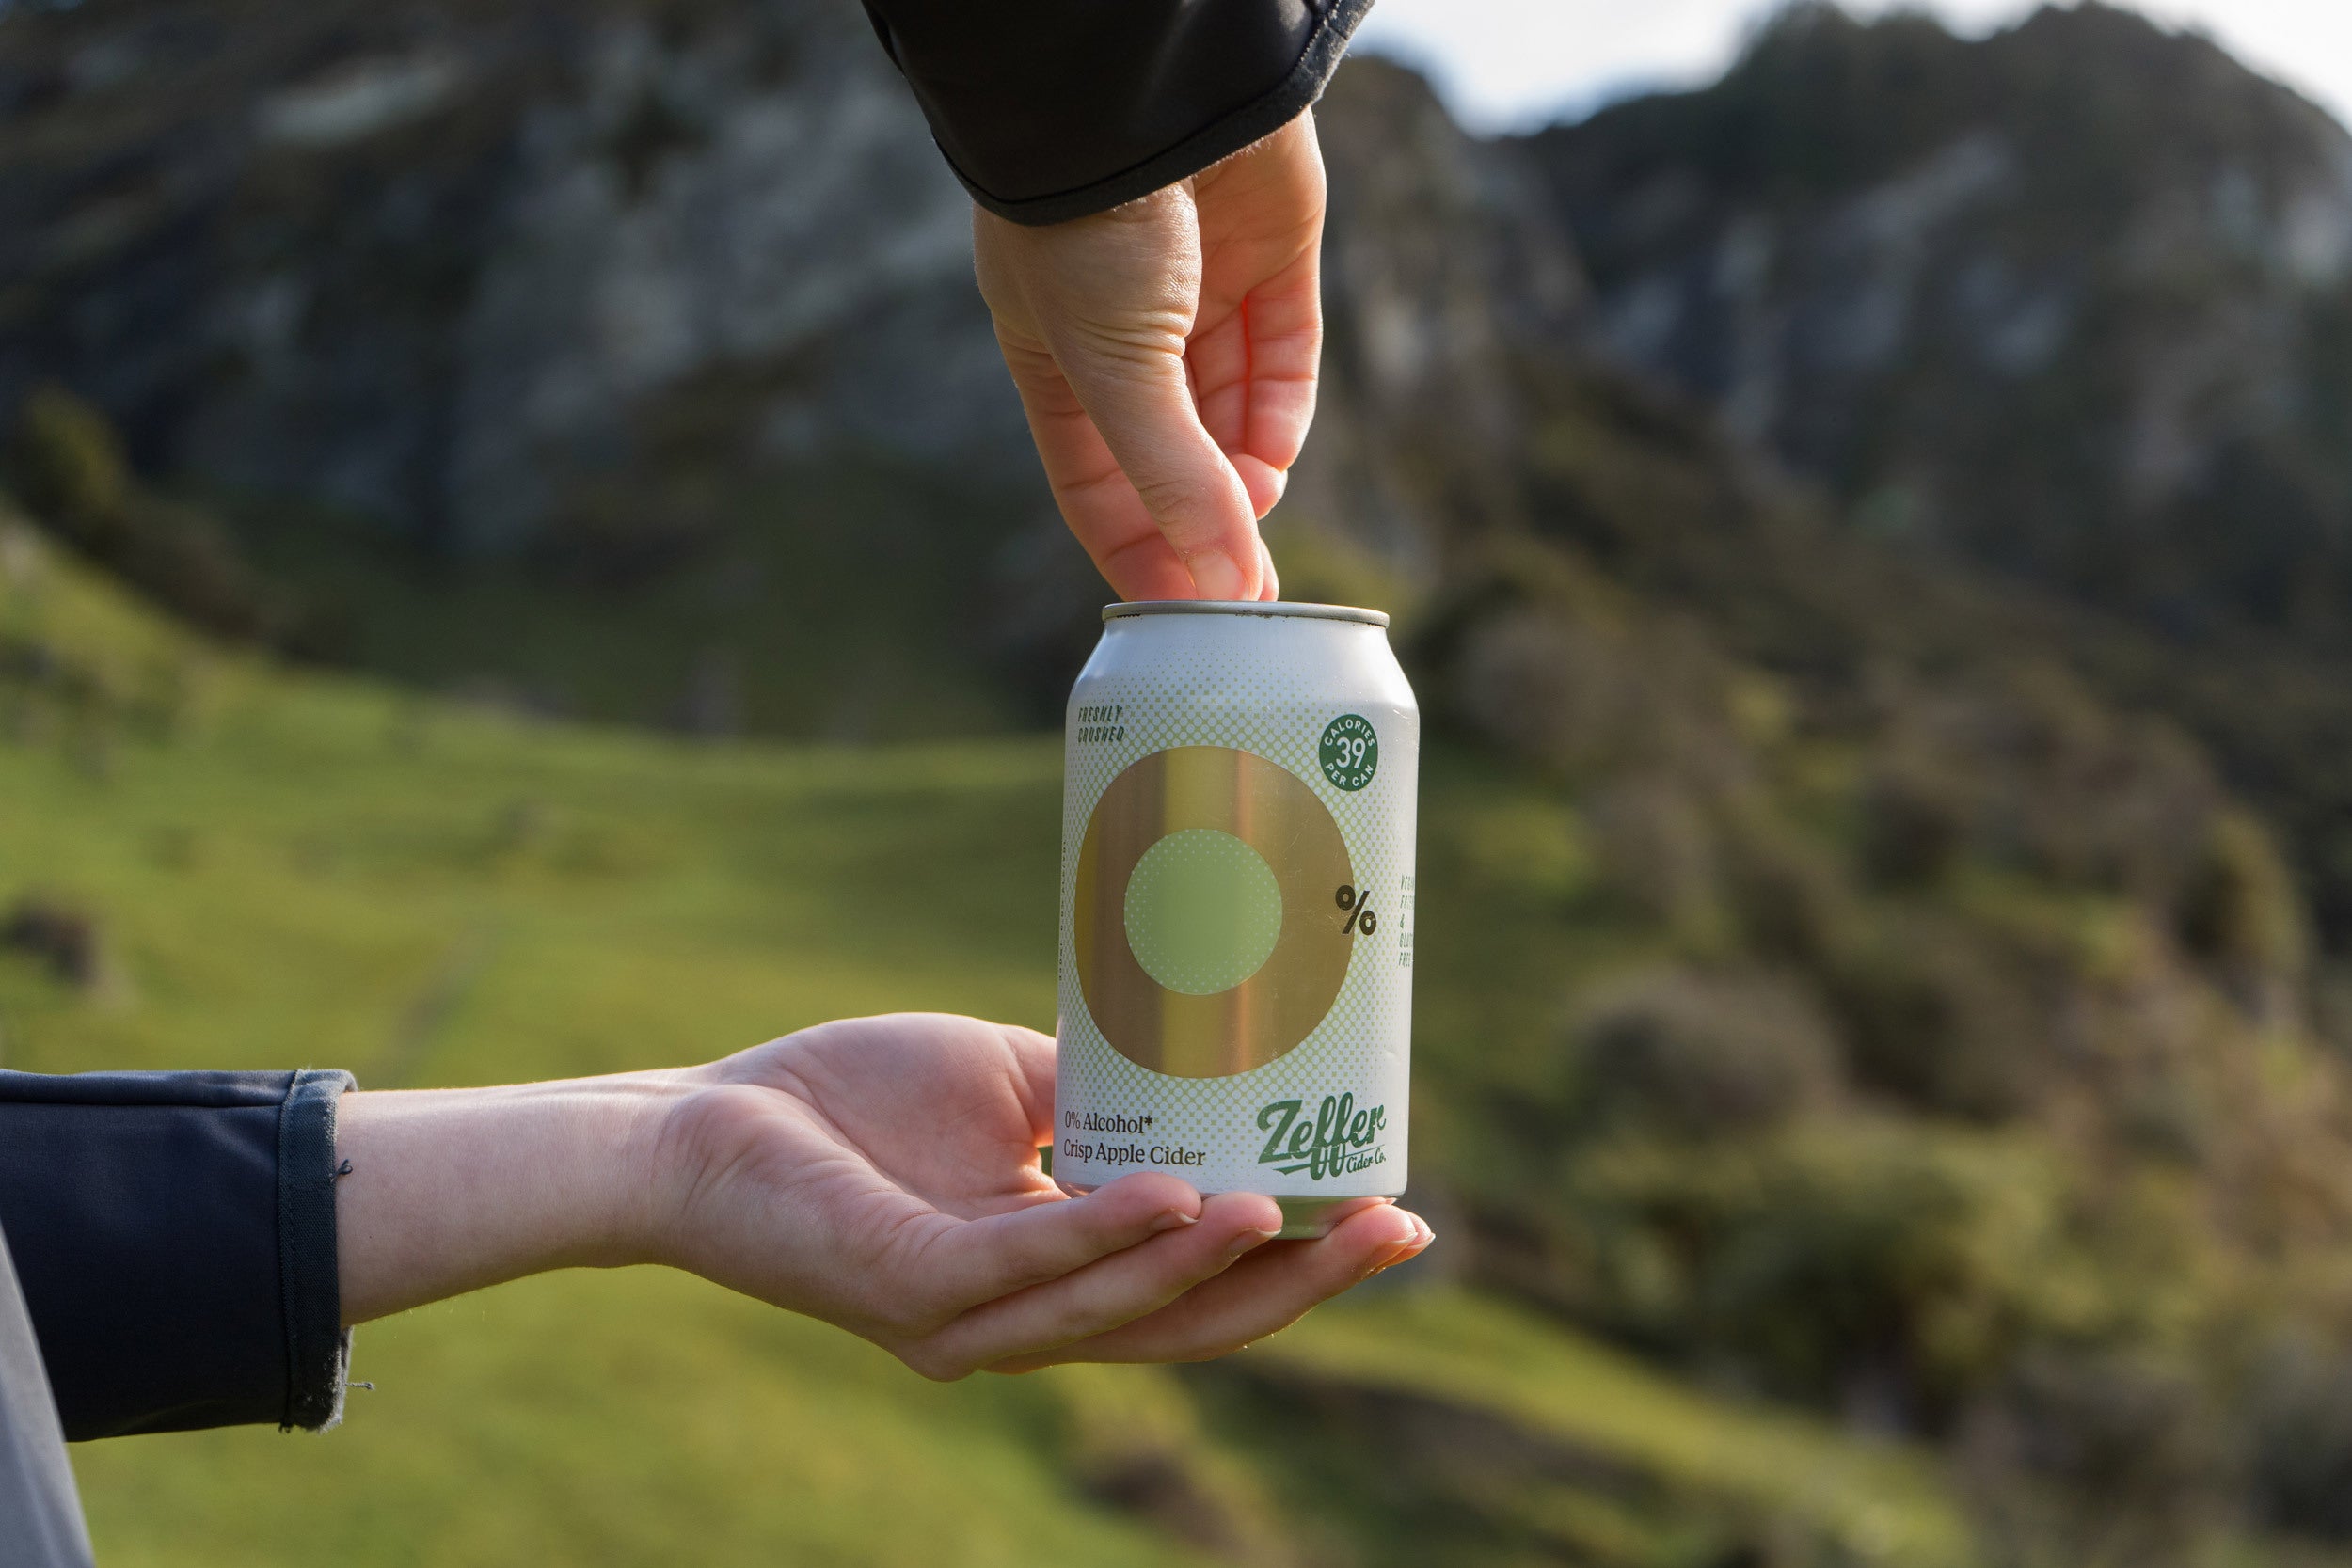 New Zealand’s first 0% alcohol cider from New Zealand’s first Zero Carbon cidery